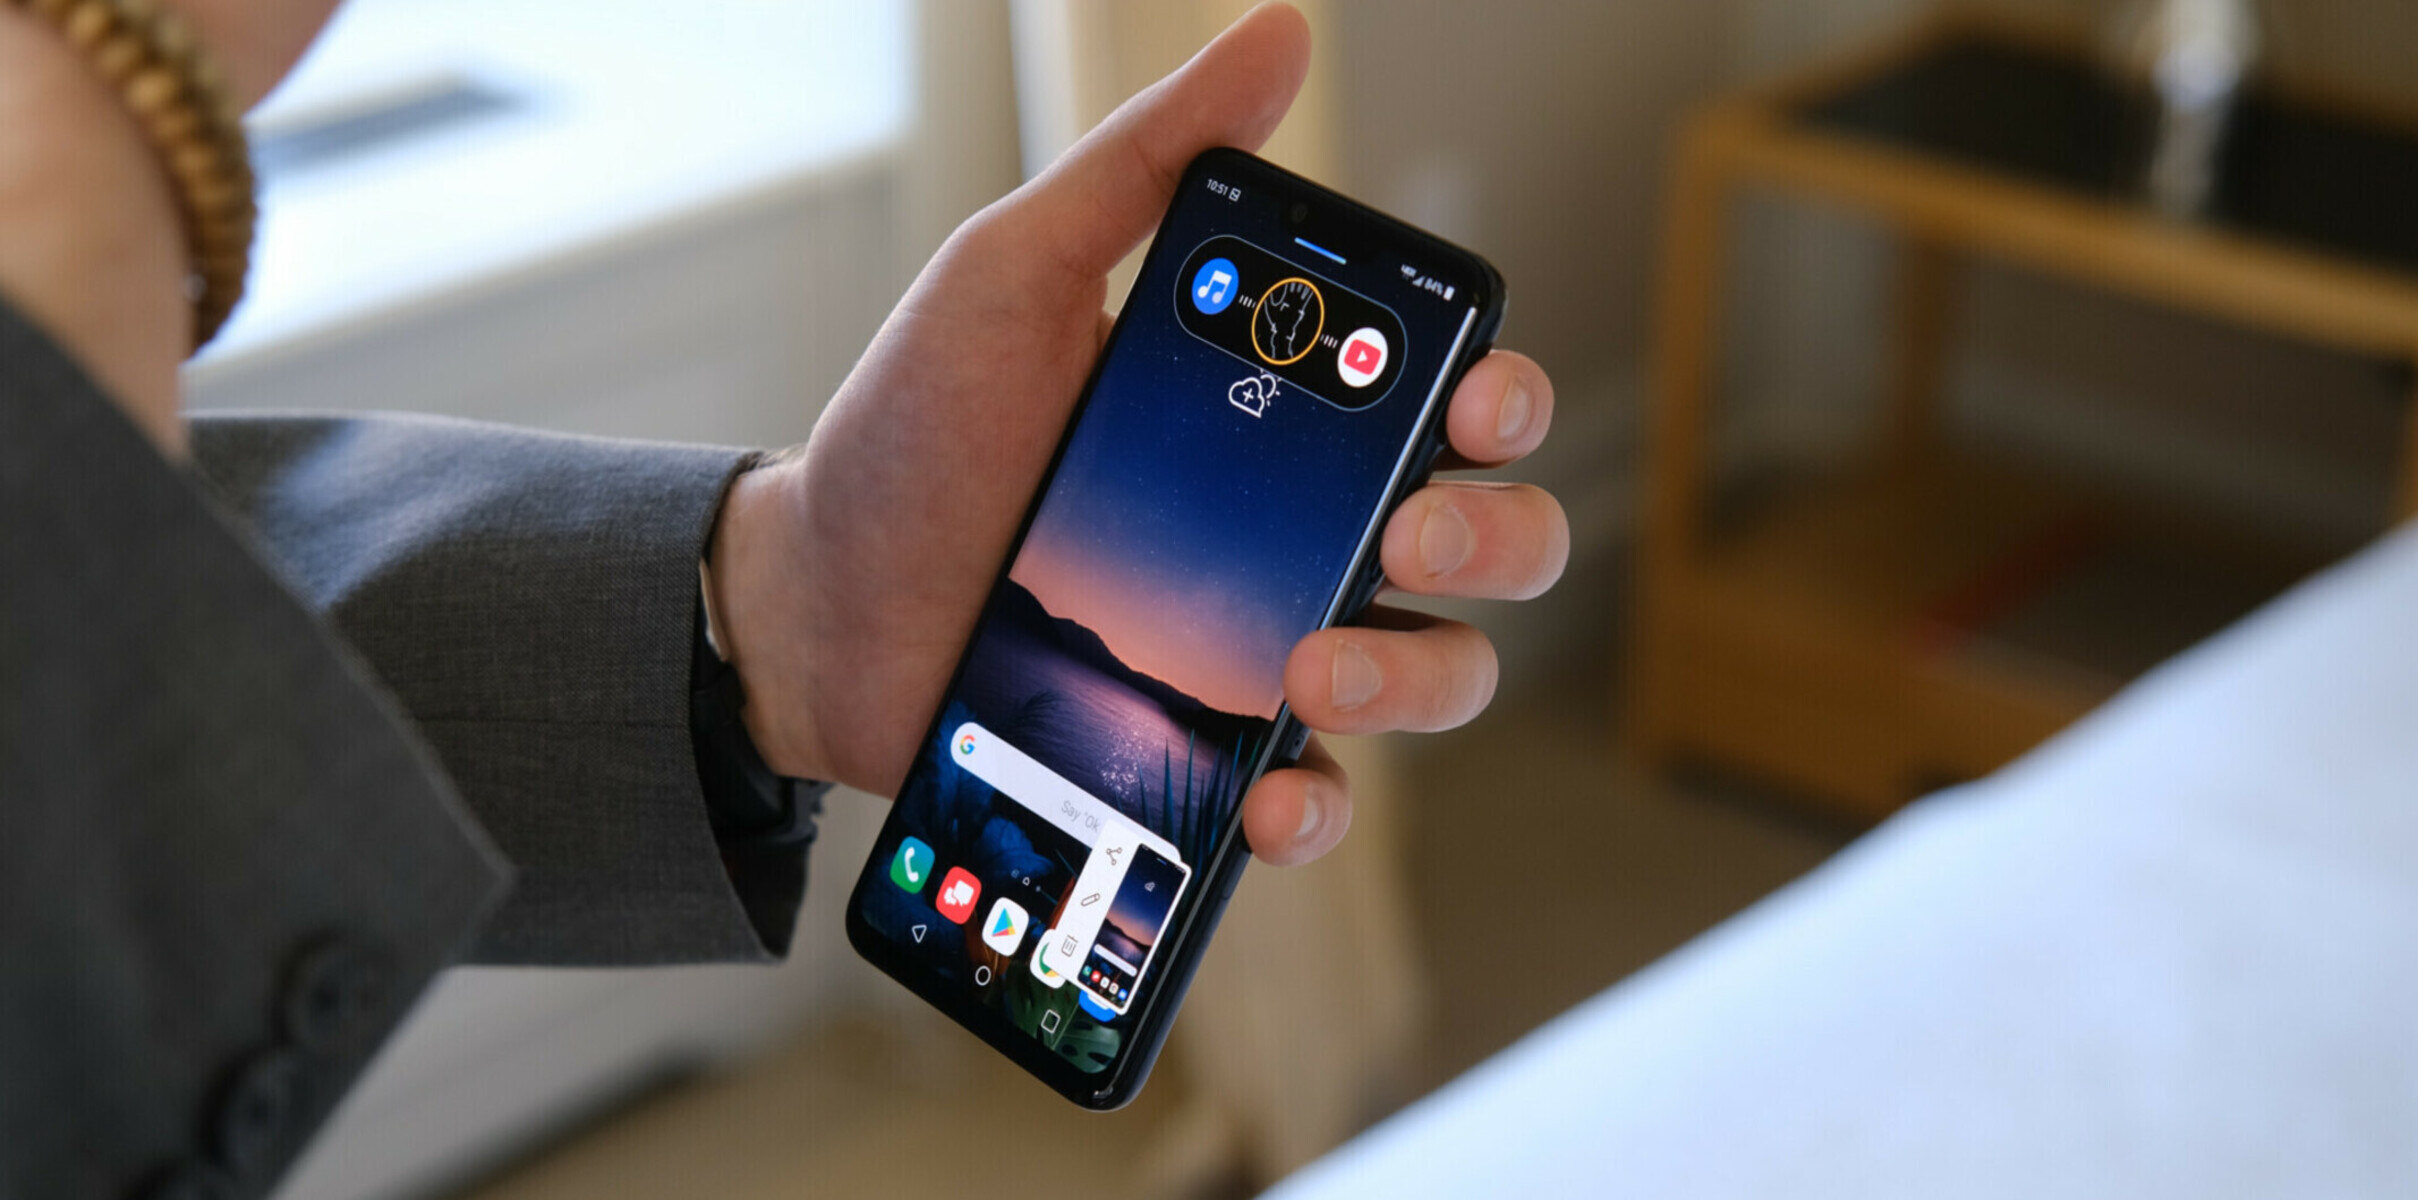 Capturing Screenshots On LG G8 ThinQ: A Step-by-Step Guide